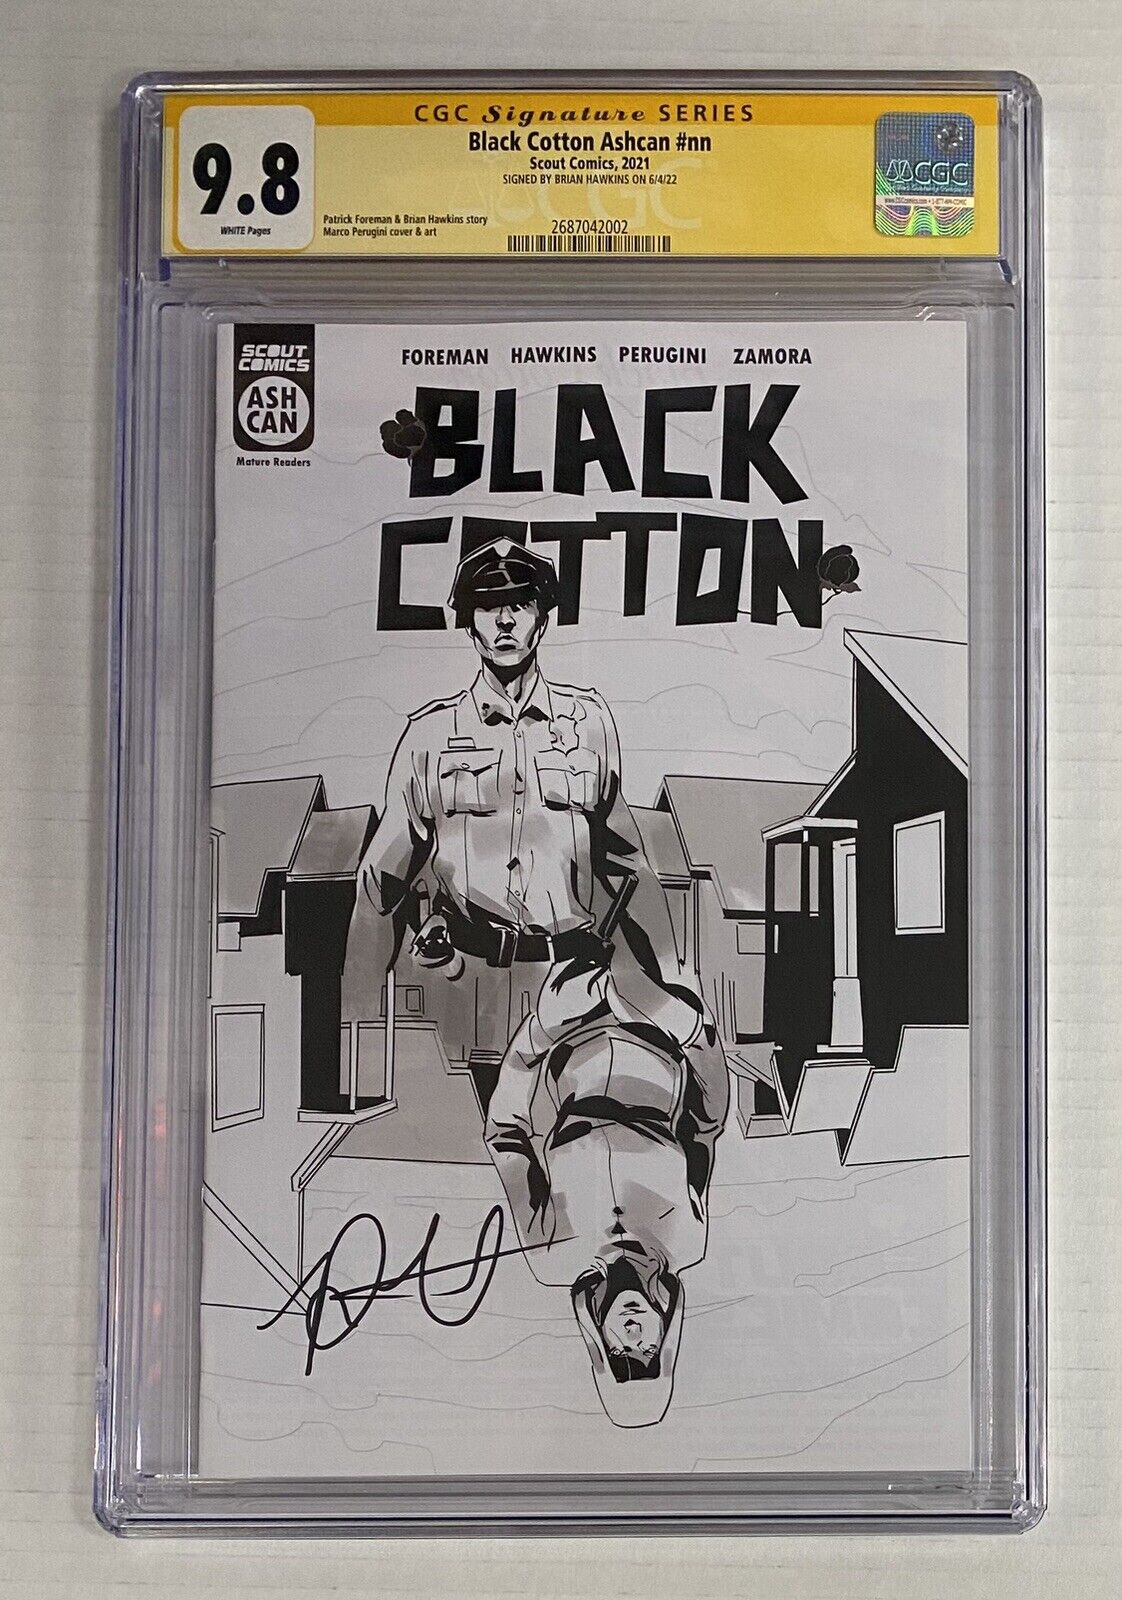 BLACK COTTON #1 ASHCAN Scout Comics CGC SS 9.8 SIGNED BRIAN HAWKINS